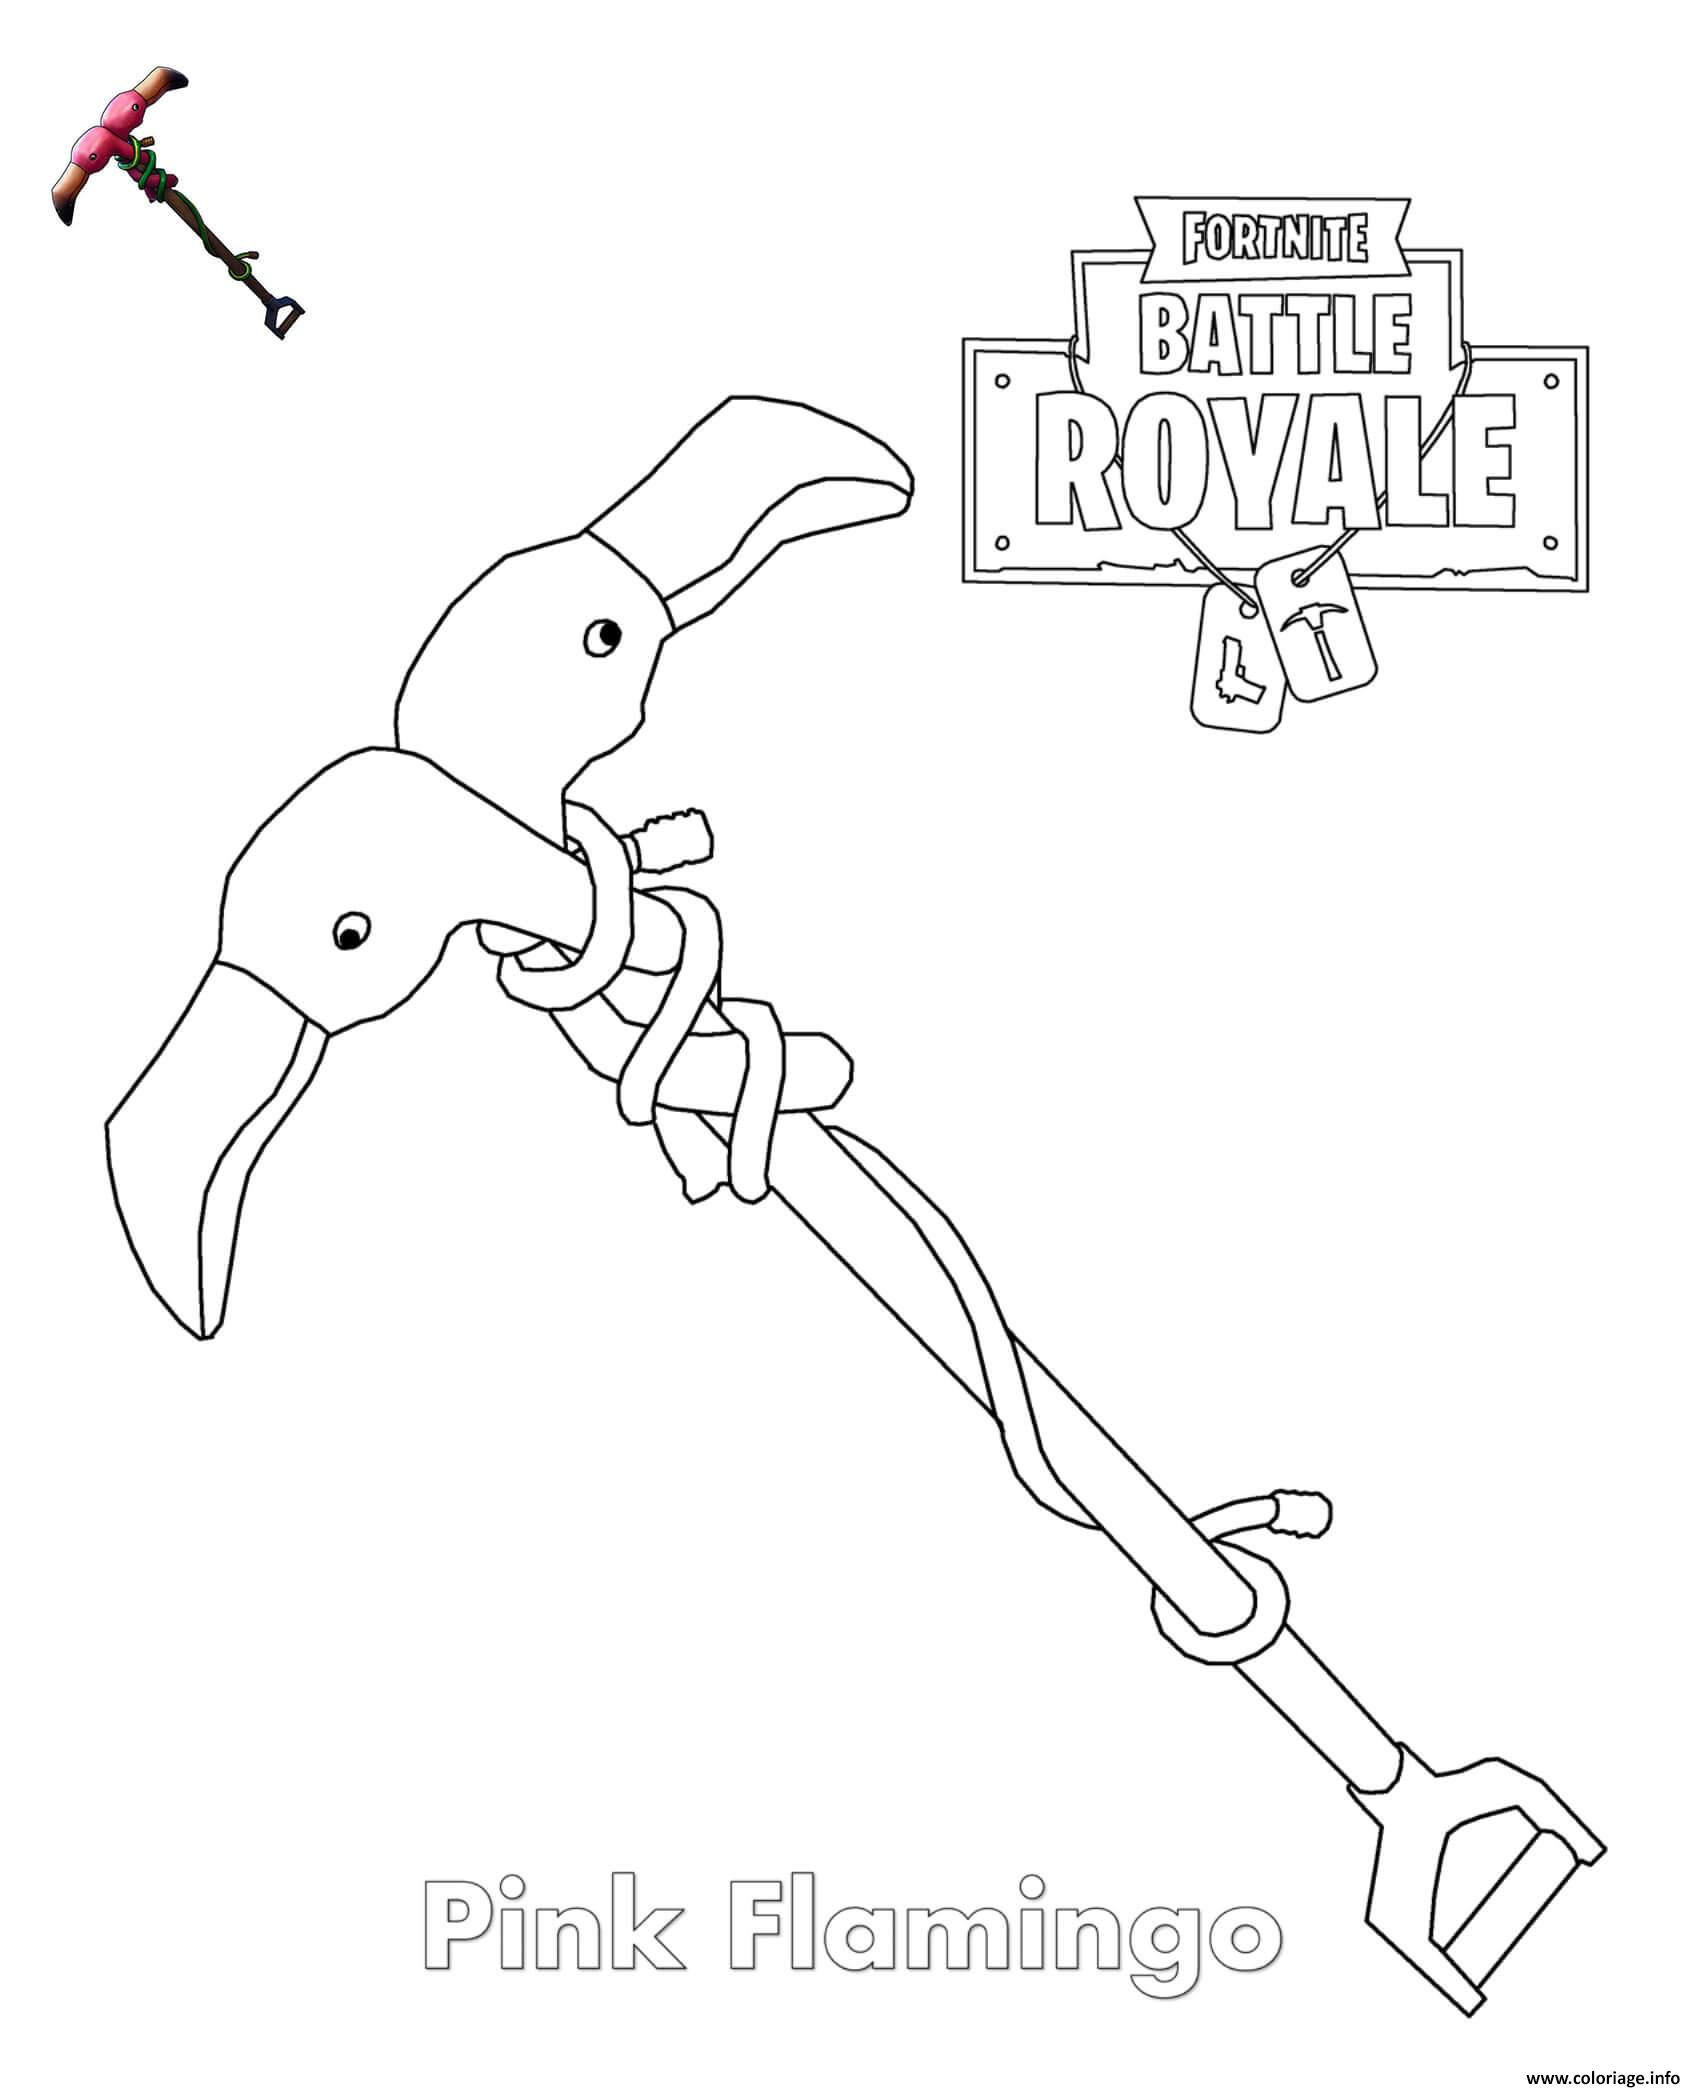 Coloriage fortnite A Imprimer Luxe Coloriage Pink Flamingo Pickaxe fortnite Jecolorie